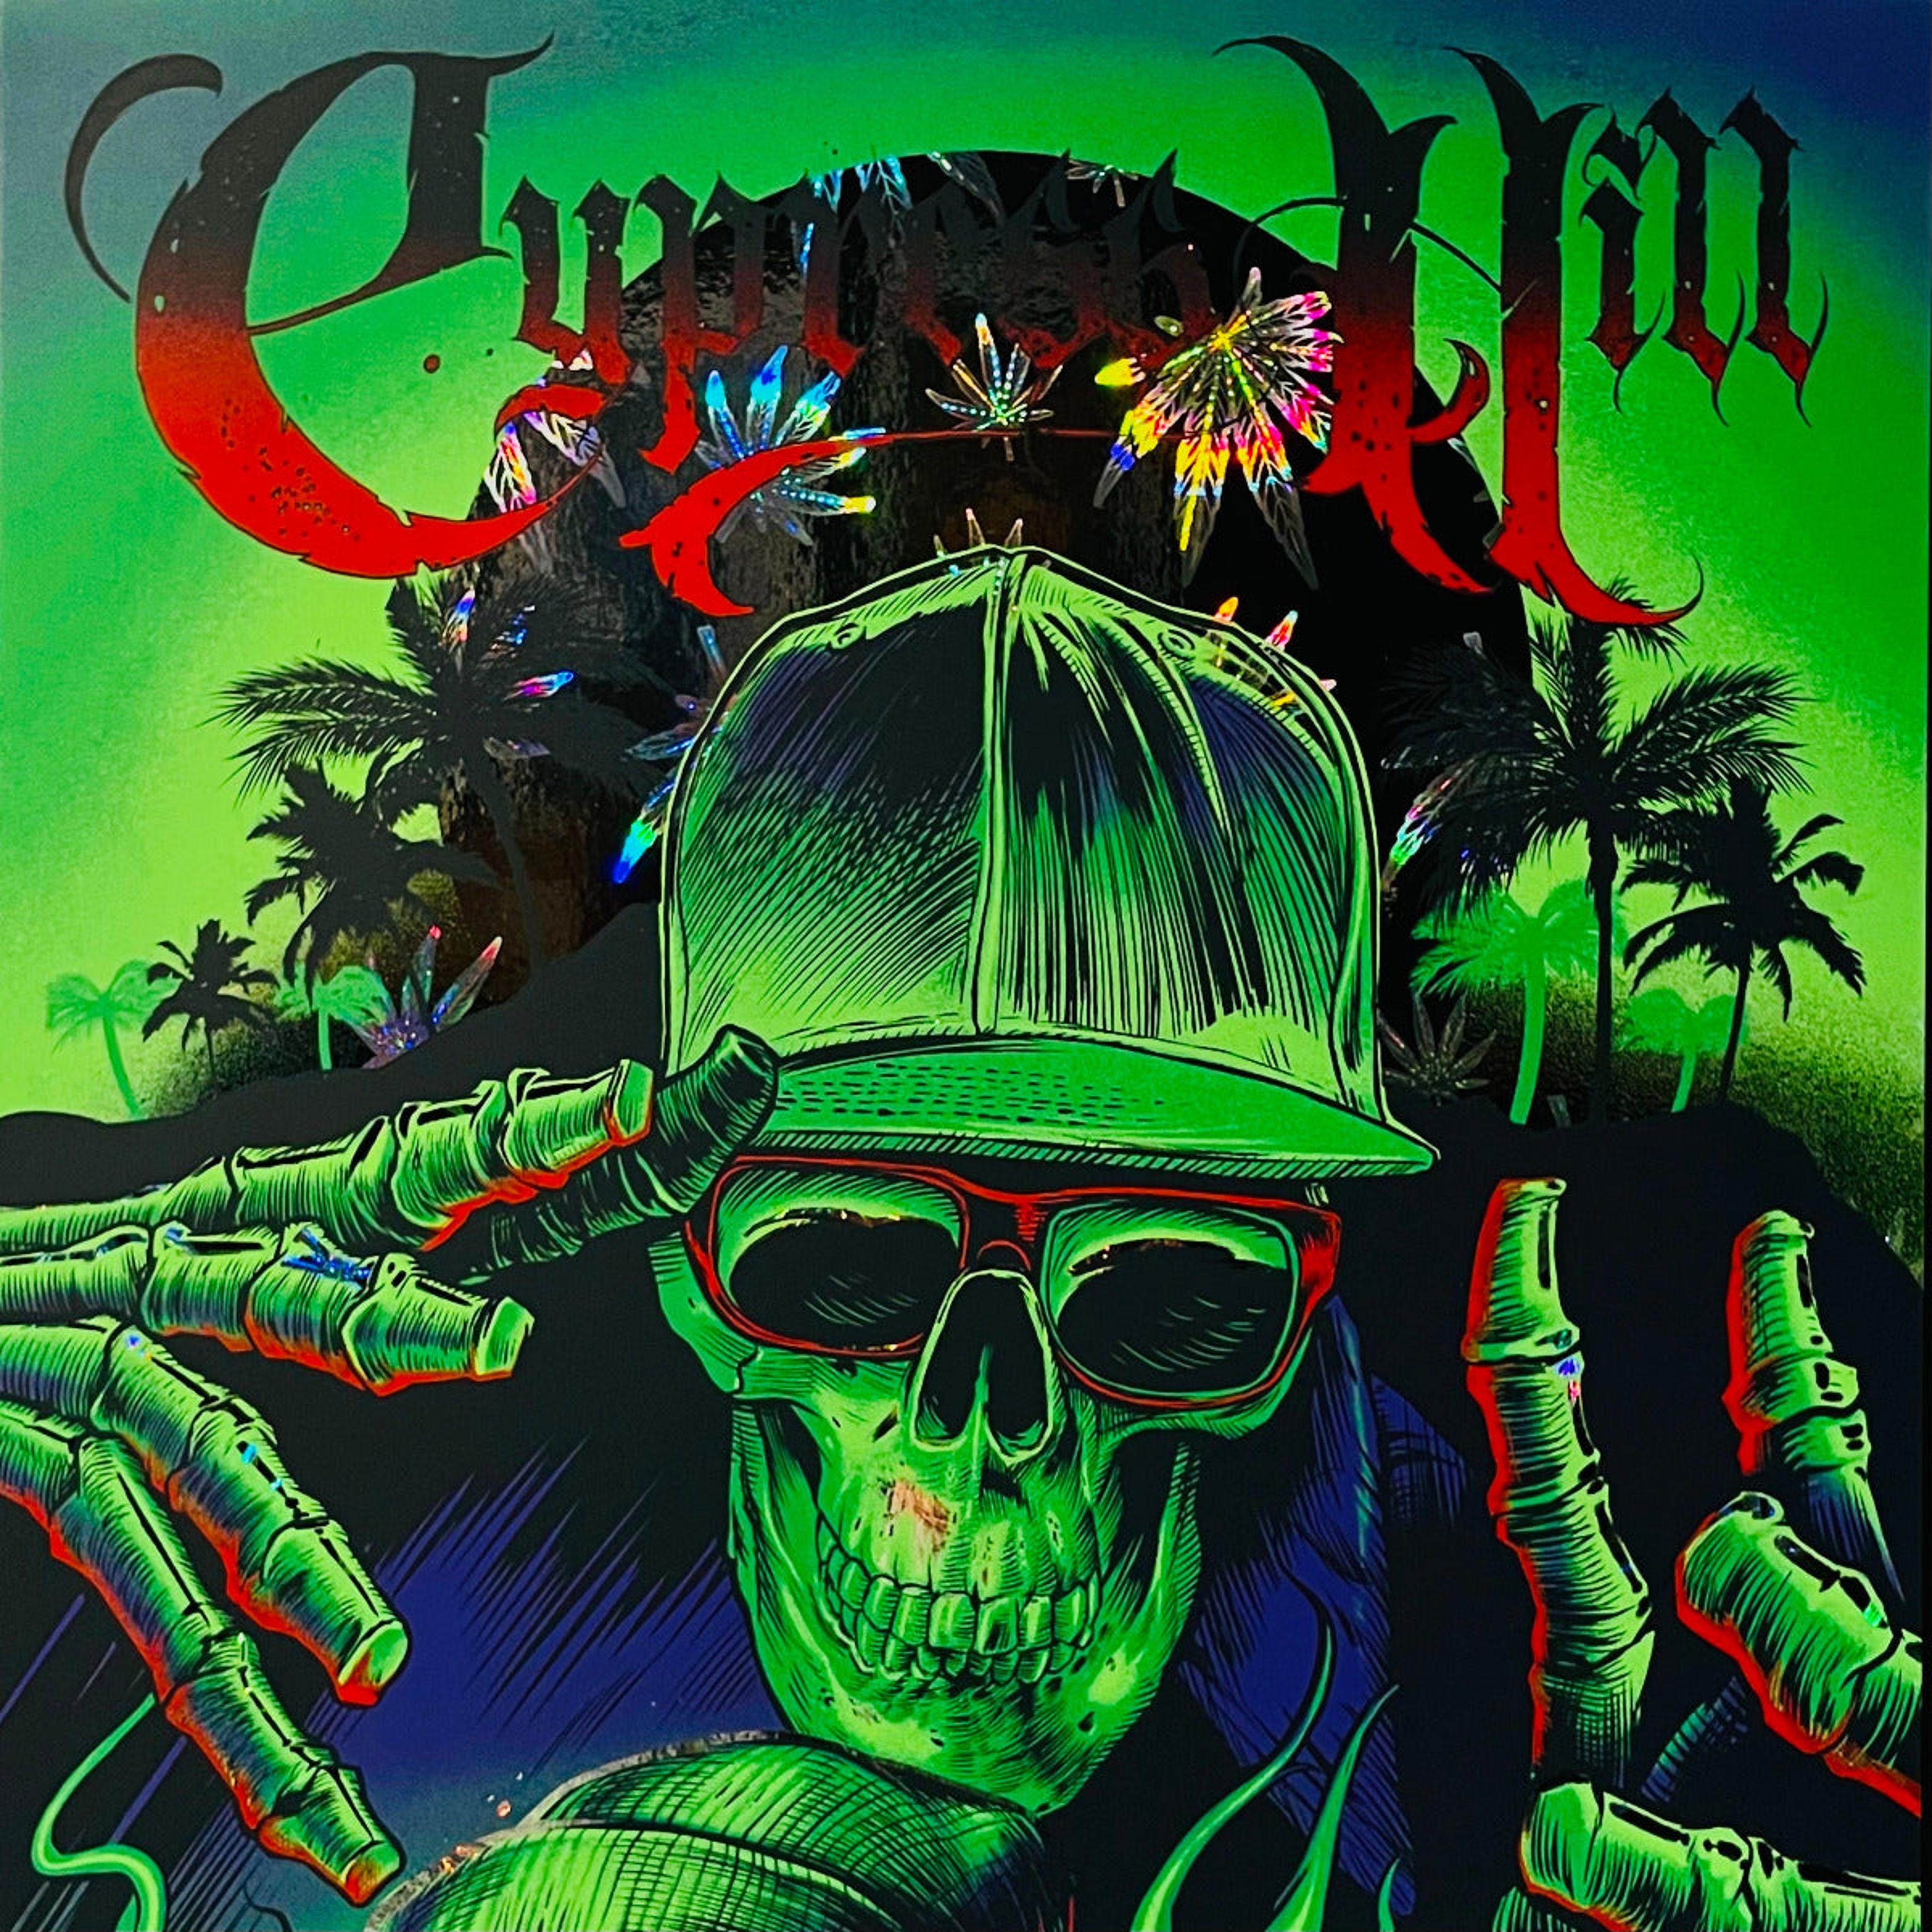 Alternate View 1 of Cypress Hill "Insane In The Brain" (Weed Foil Printer's Proof)